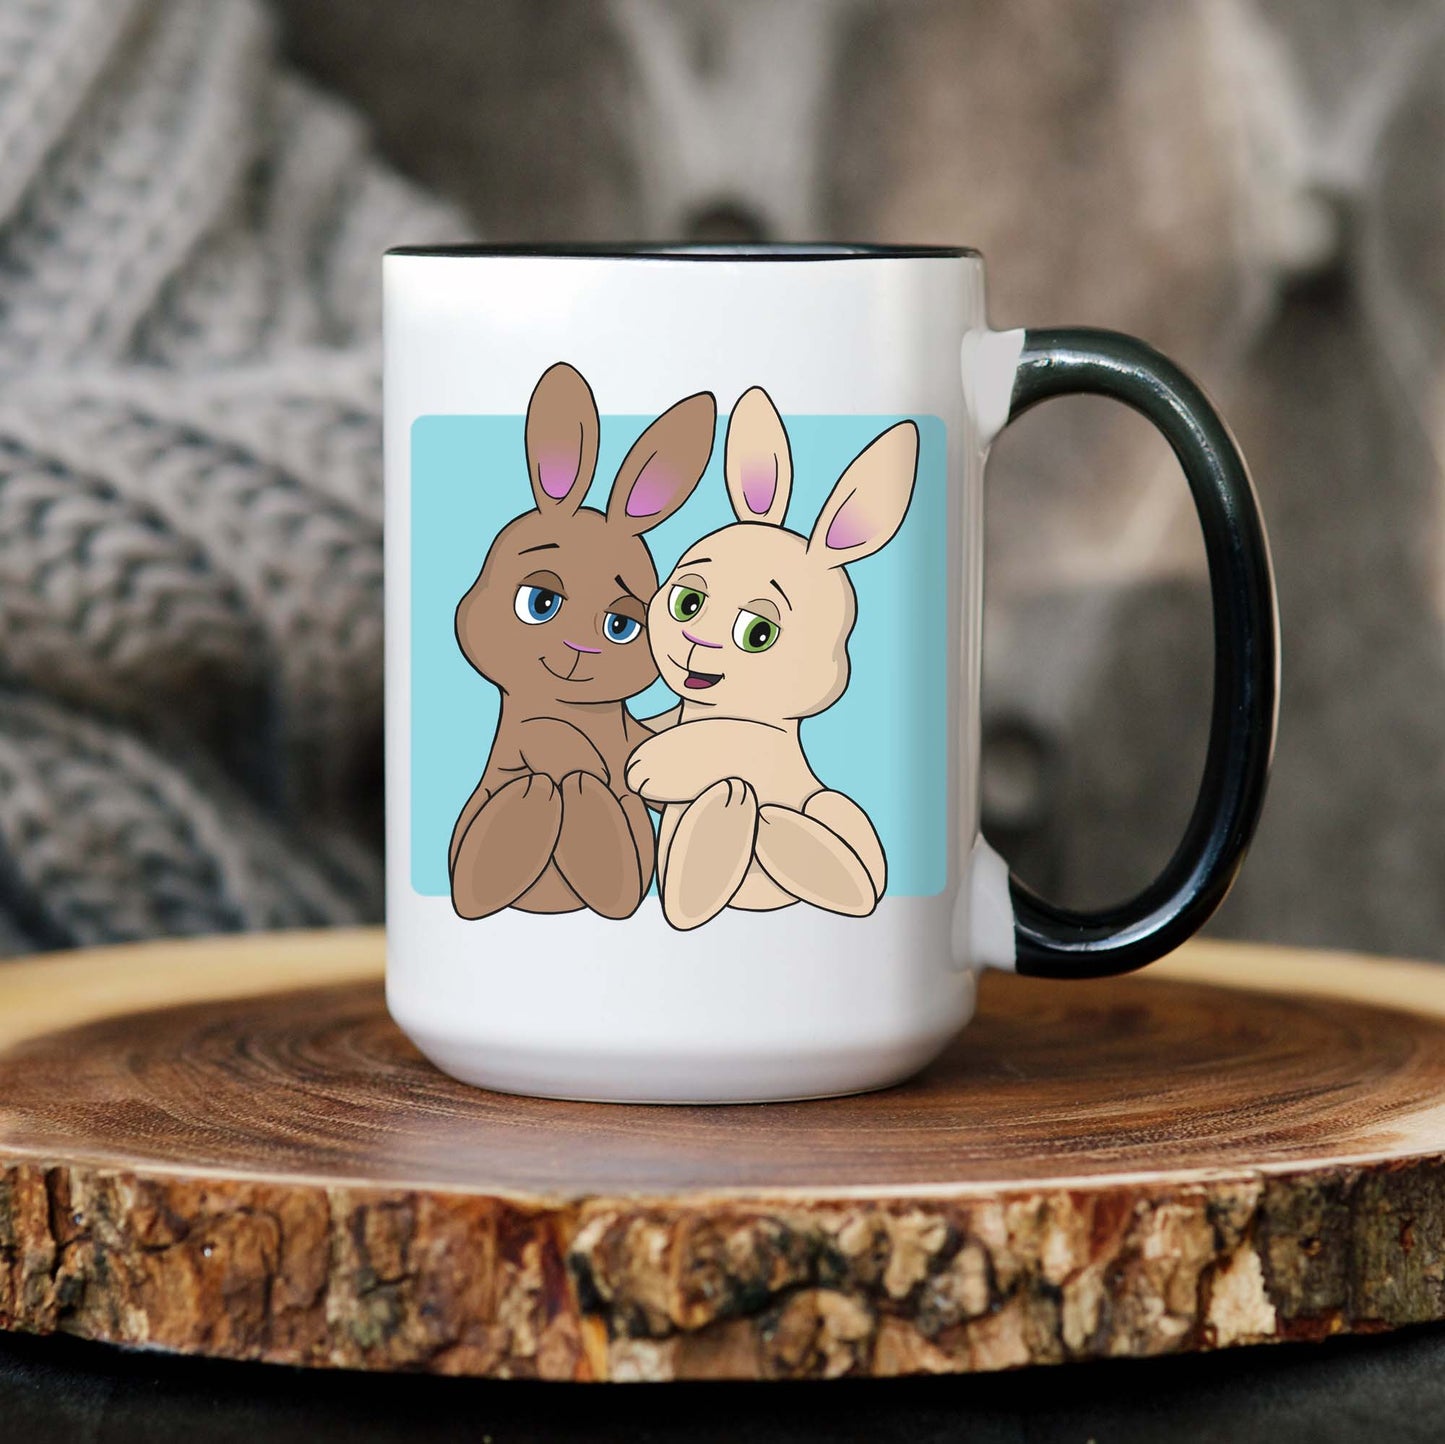 Skip and Pip Cuddles Mug in two sizes